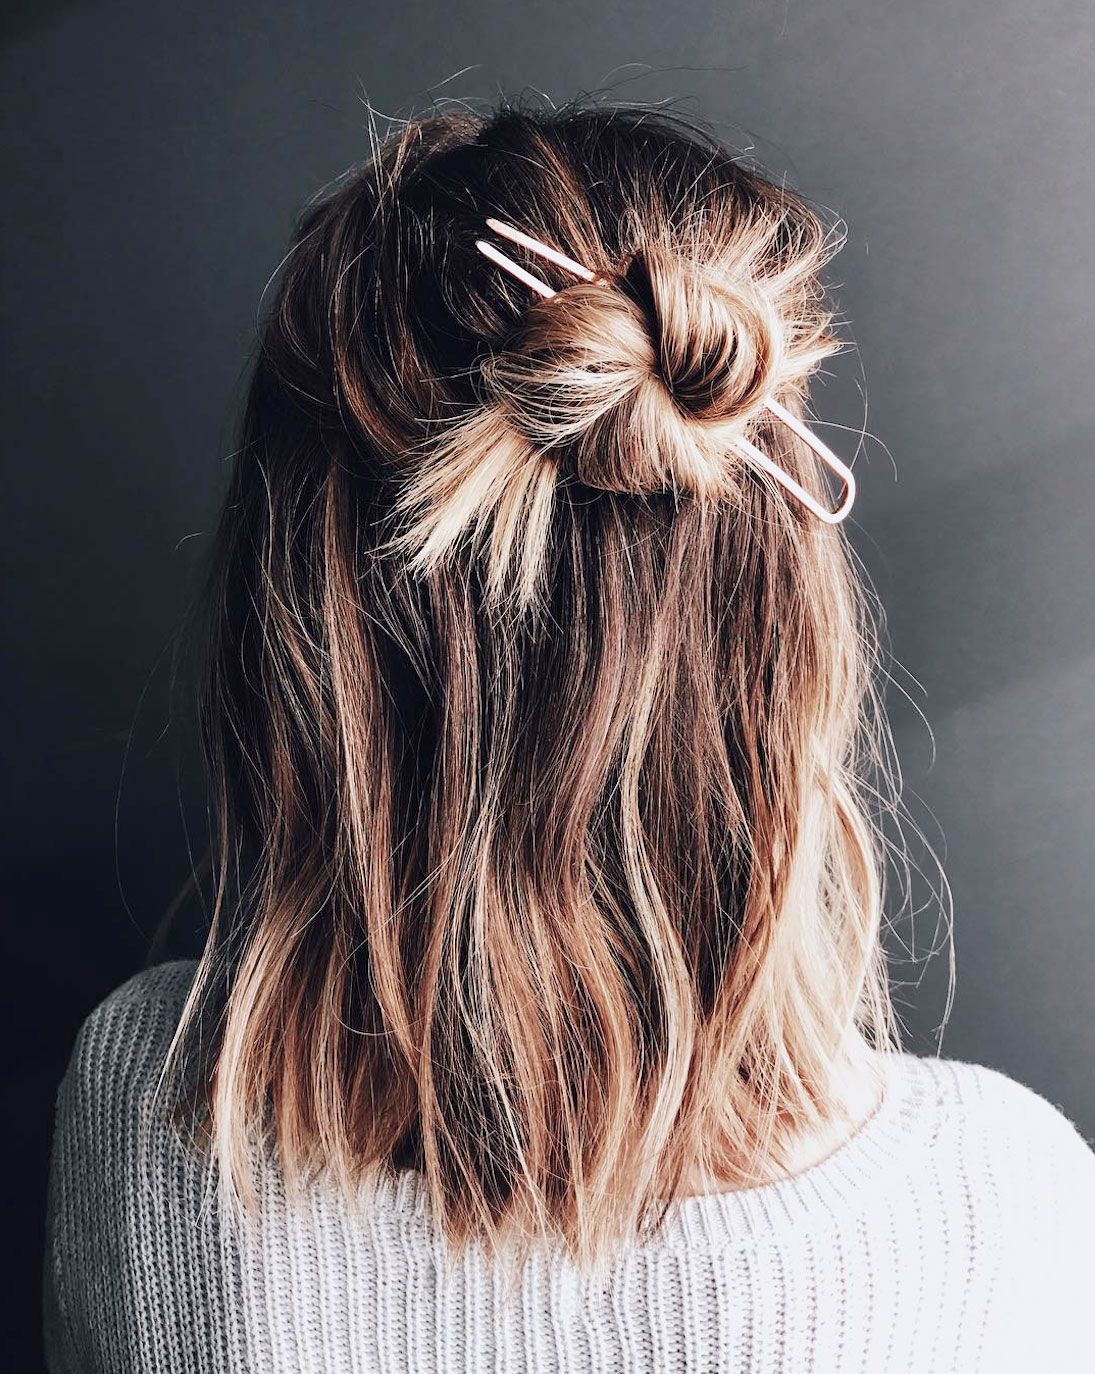 4 Ways to Do Your Hair in a Side Bun - wikiHow